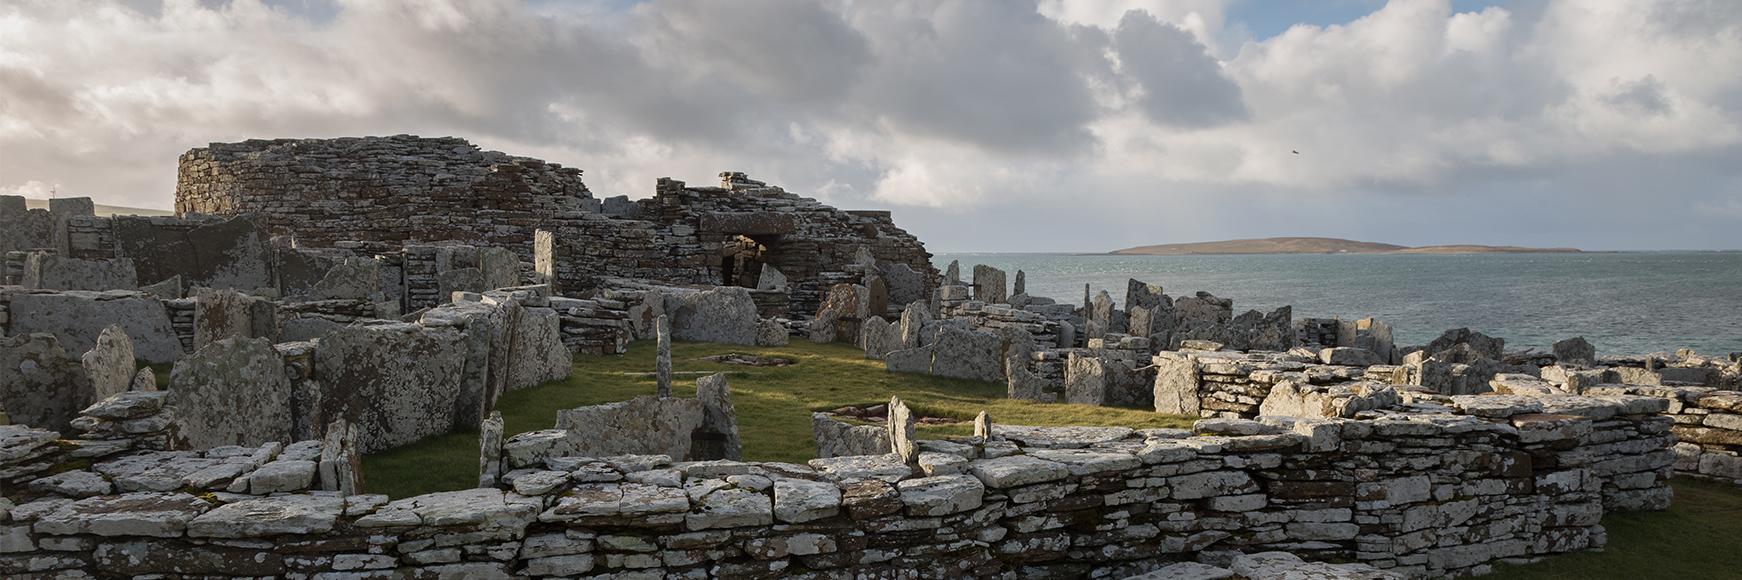 Top 6 days out amongst Britain's ancient ruins banner image